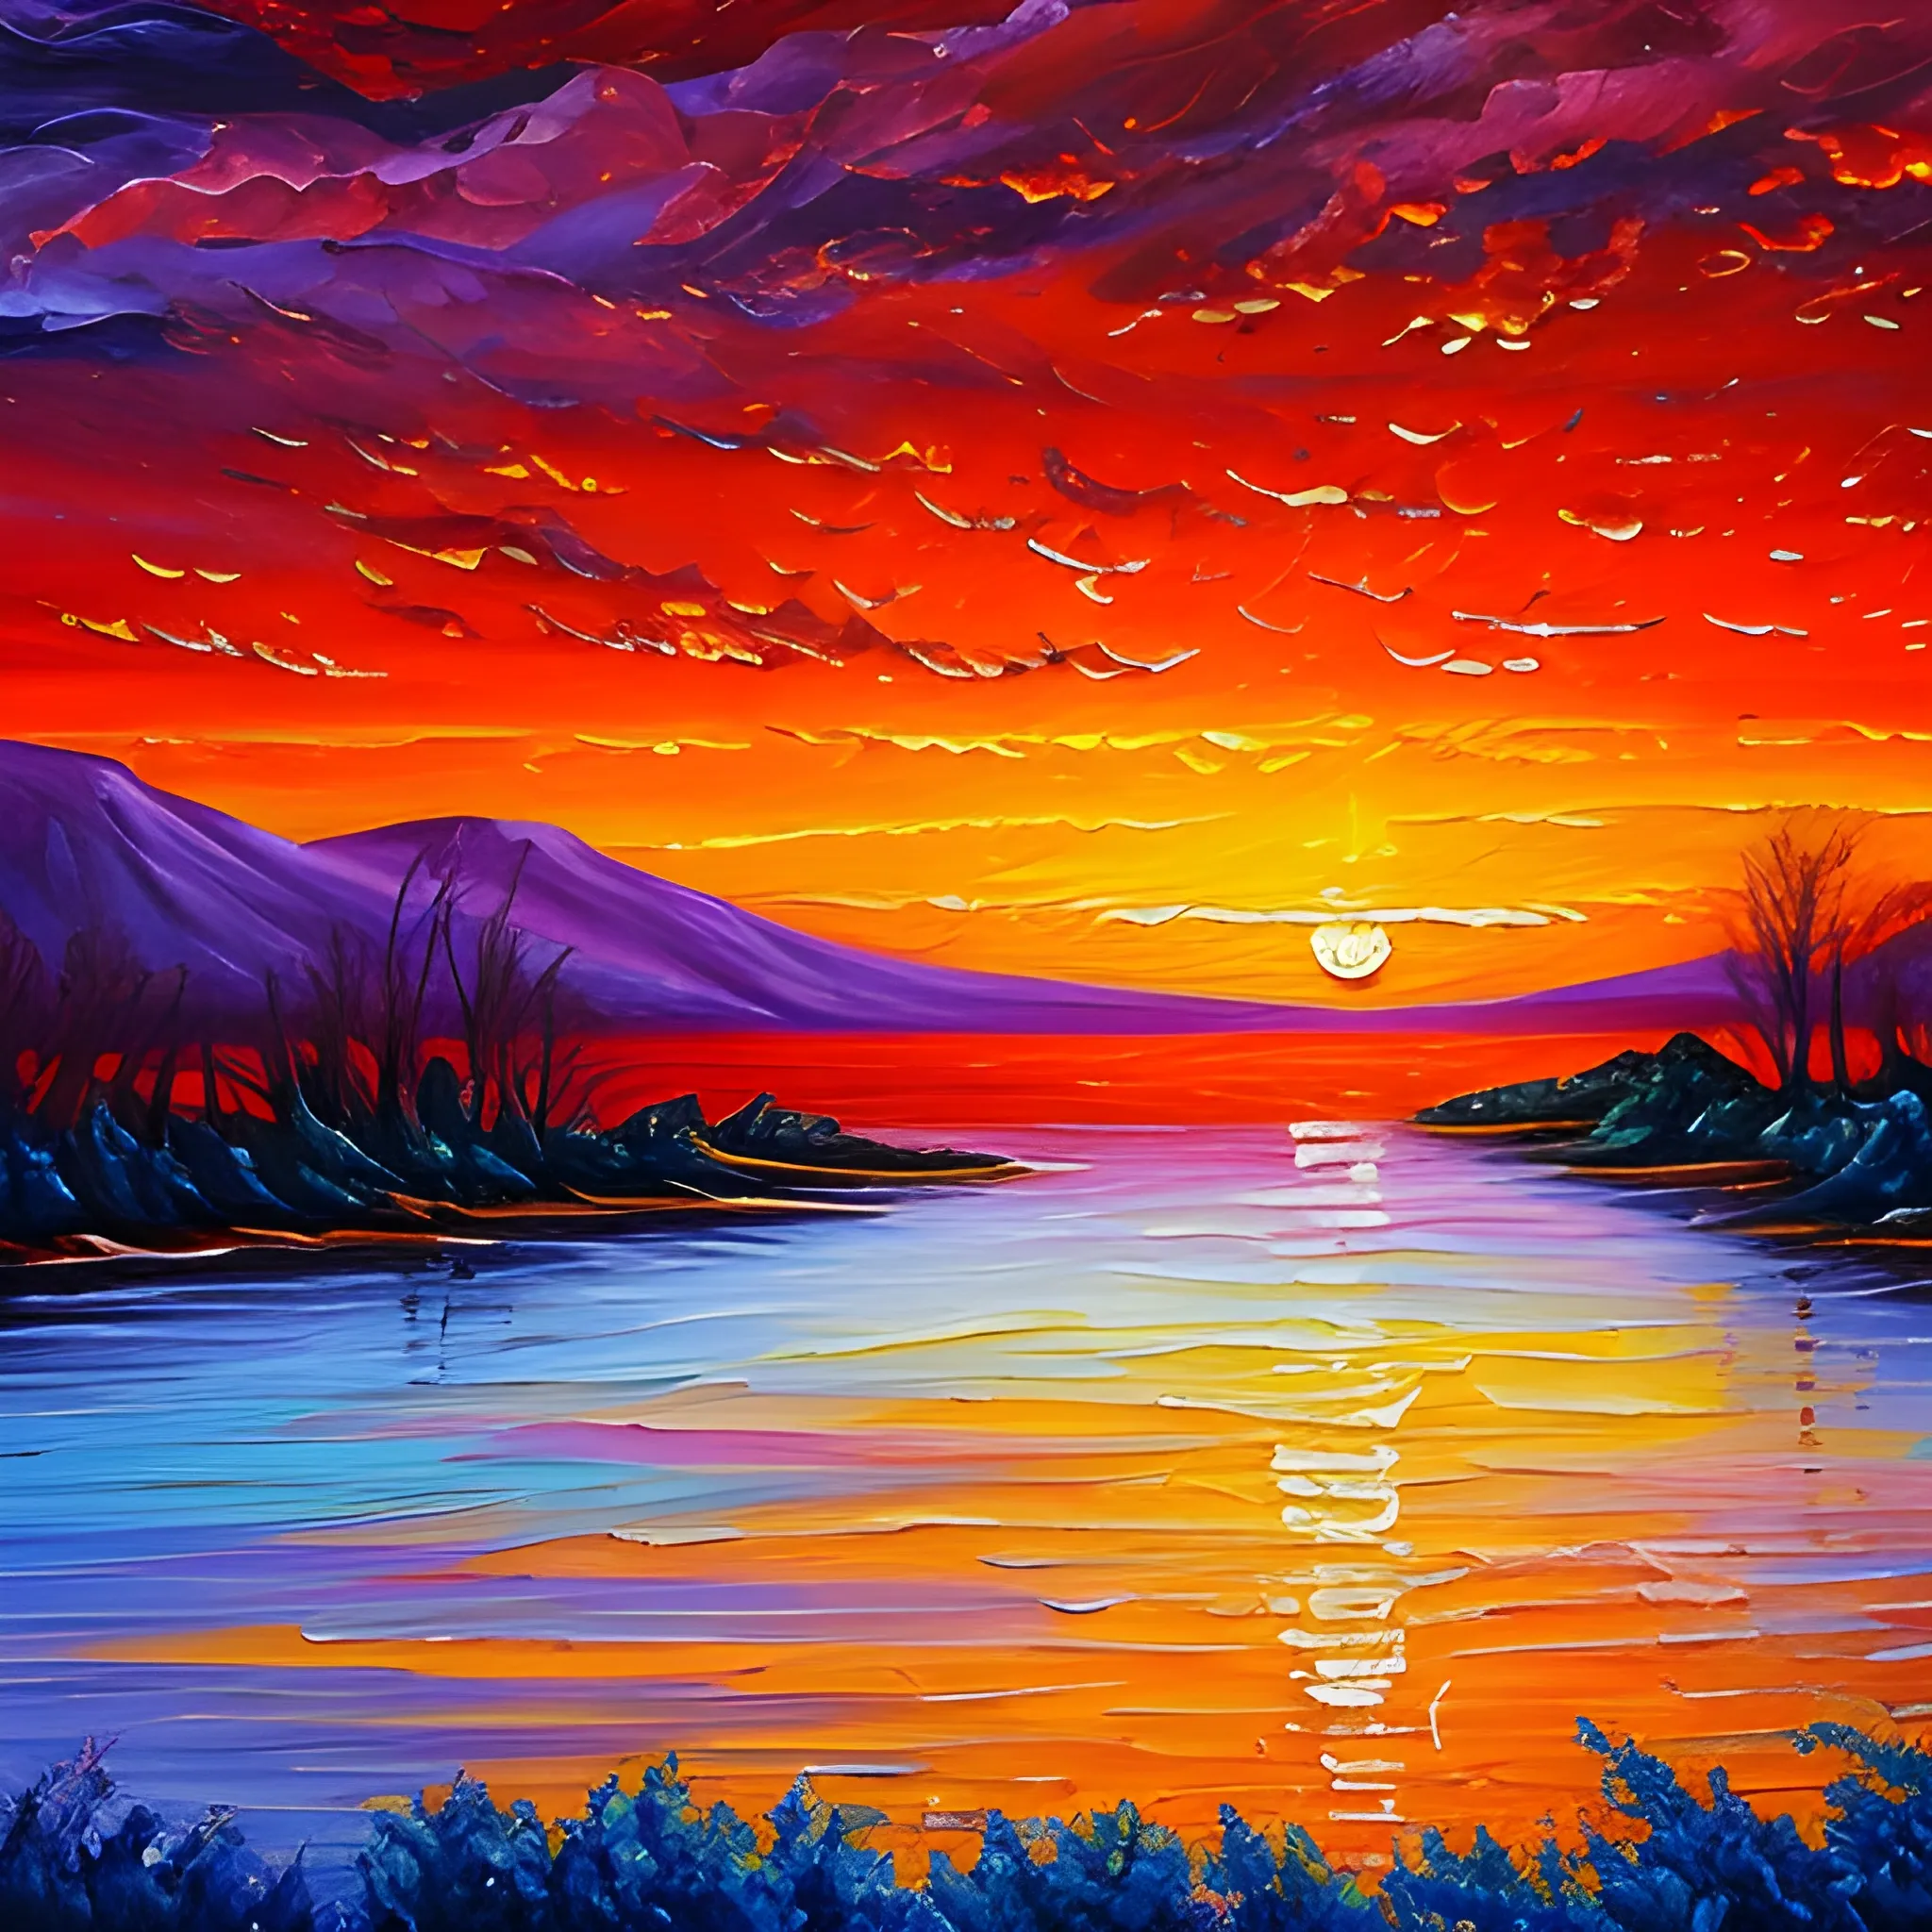 Sunset landscape painting, oil painting style